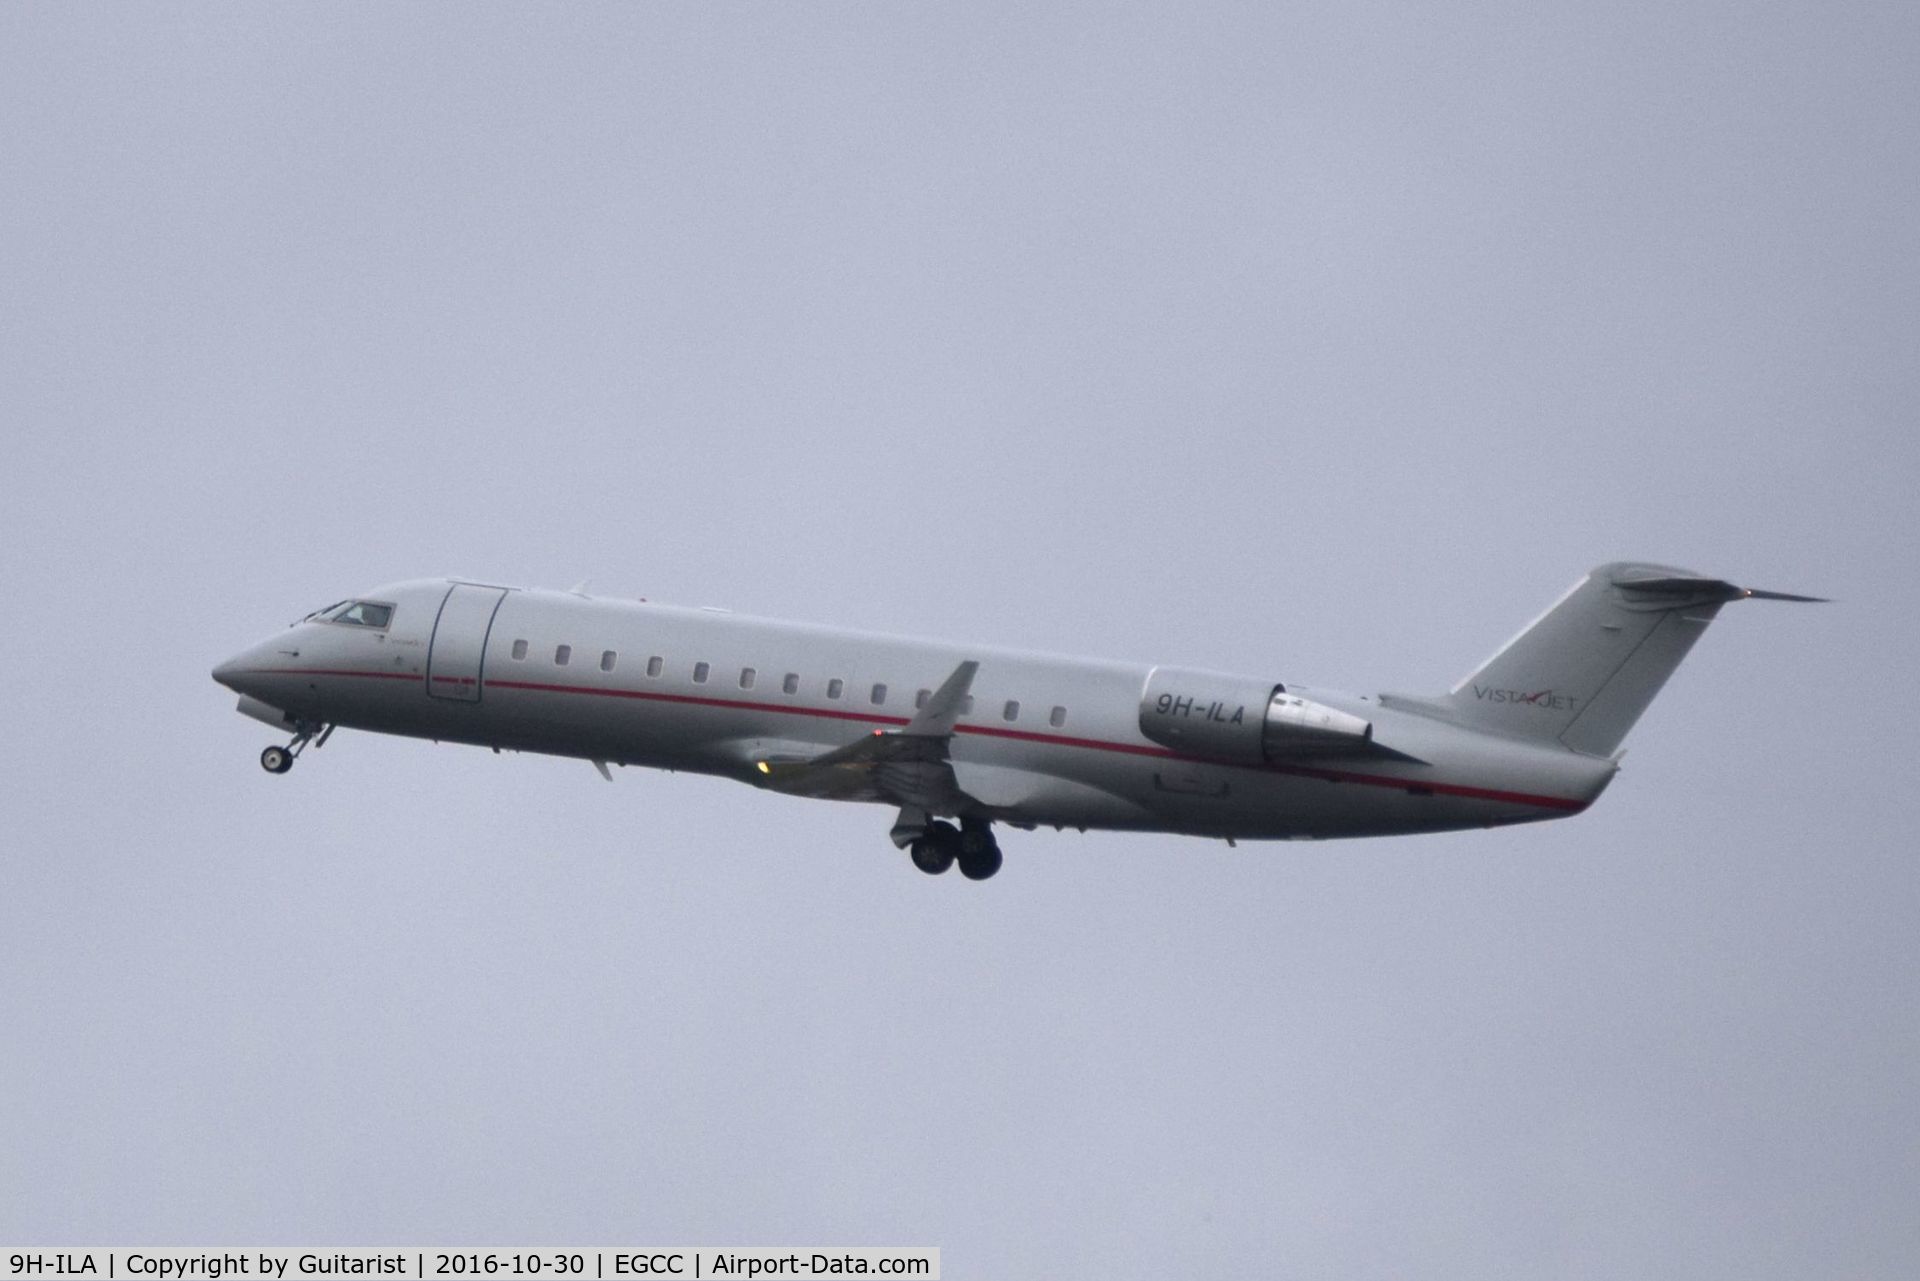 9H-ILA, 2009 Bombardier Challenger 850 (CL-600-2B19) C/N 8101, At Manchester